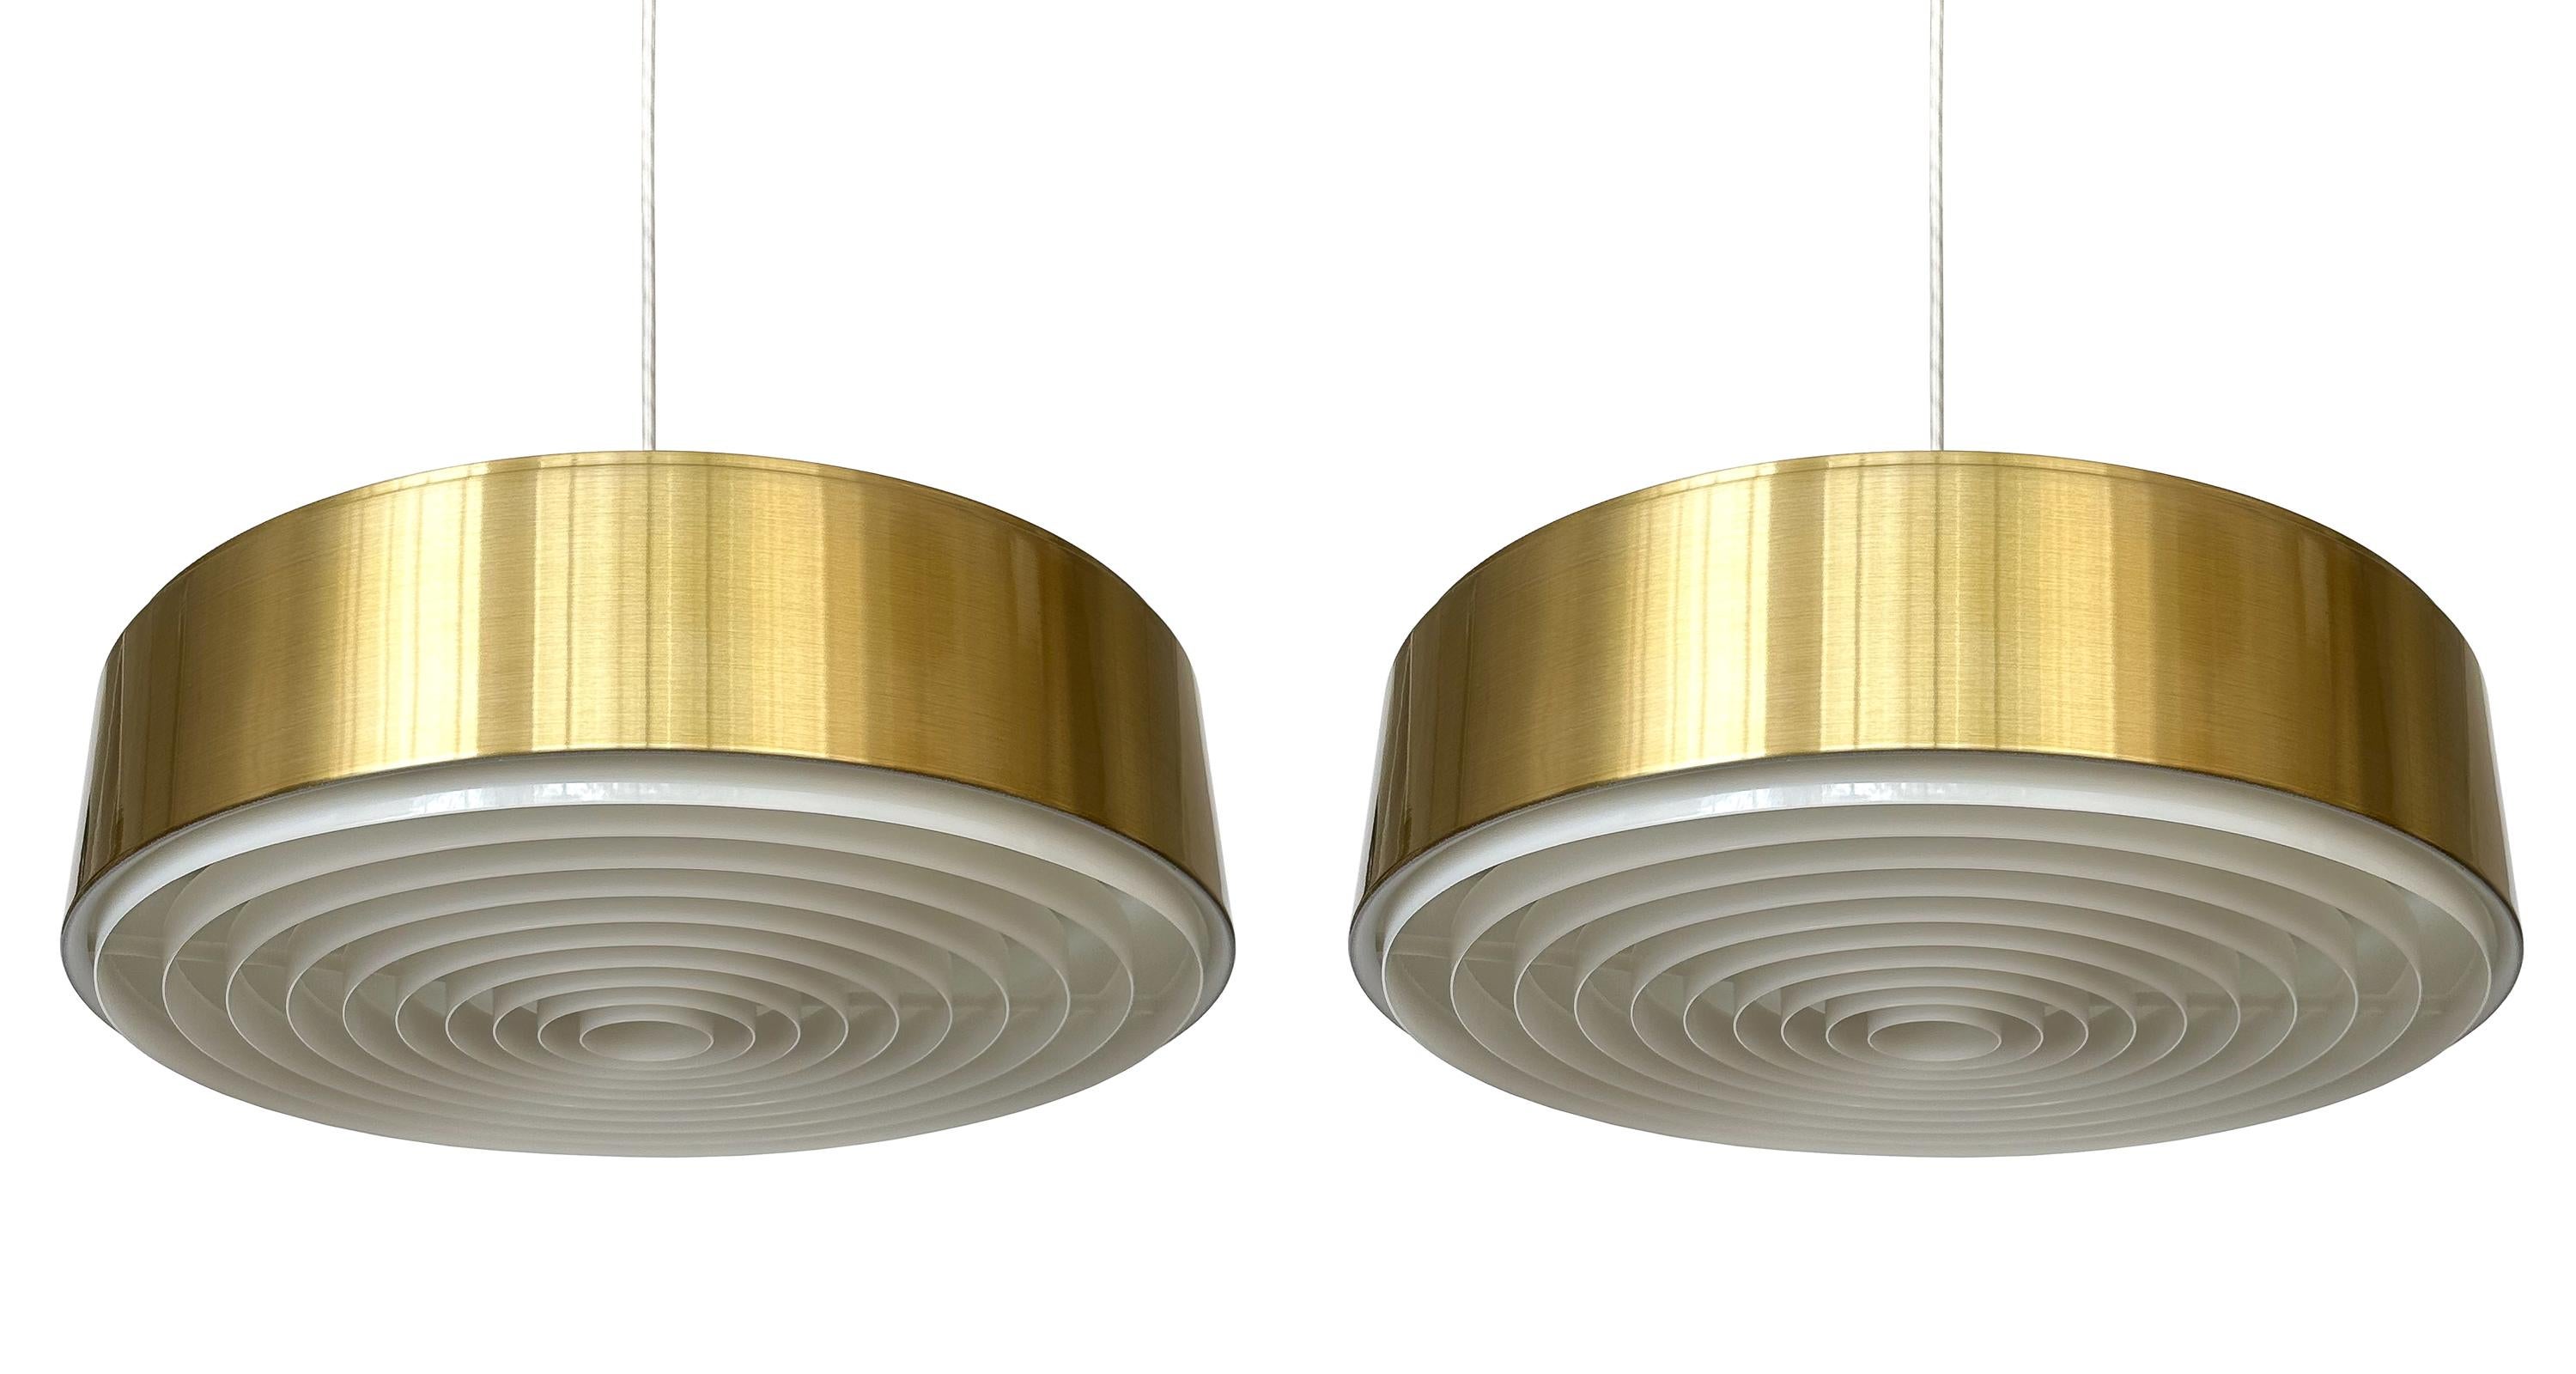 Elevate your interiors with the subtle sophistication of Sven Middelboe's pendant lamp for Nordisk Solar, a rare gem from Denmark's golden age of design, circa 1960s. Model 74212, with its satin brass finish over spun aluminum, this pendant is a